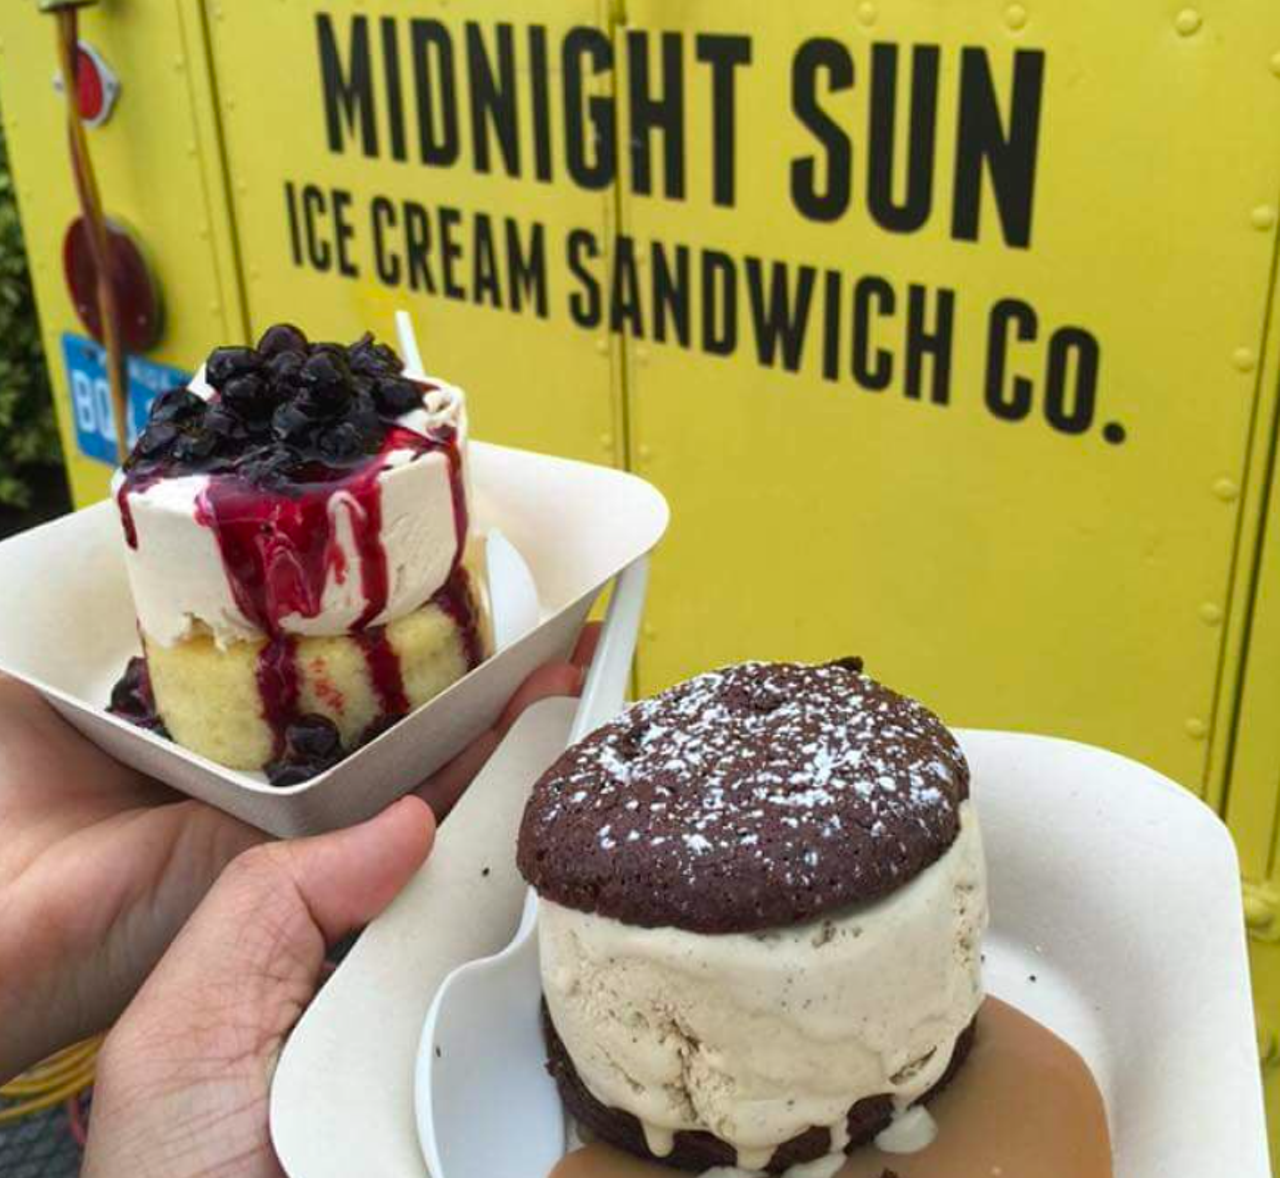 Midnight Sun Ice Cream Sandwich Company
Like a drive down nostalgia lane, who doesn’t love a good ice cream truck? These gourmet ice cream sandwiches are worth the trip, but they're known to play hard-to-get. You'll have to check out their socials to track them down, but it's always worth it.